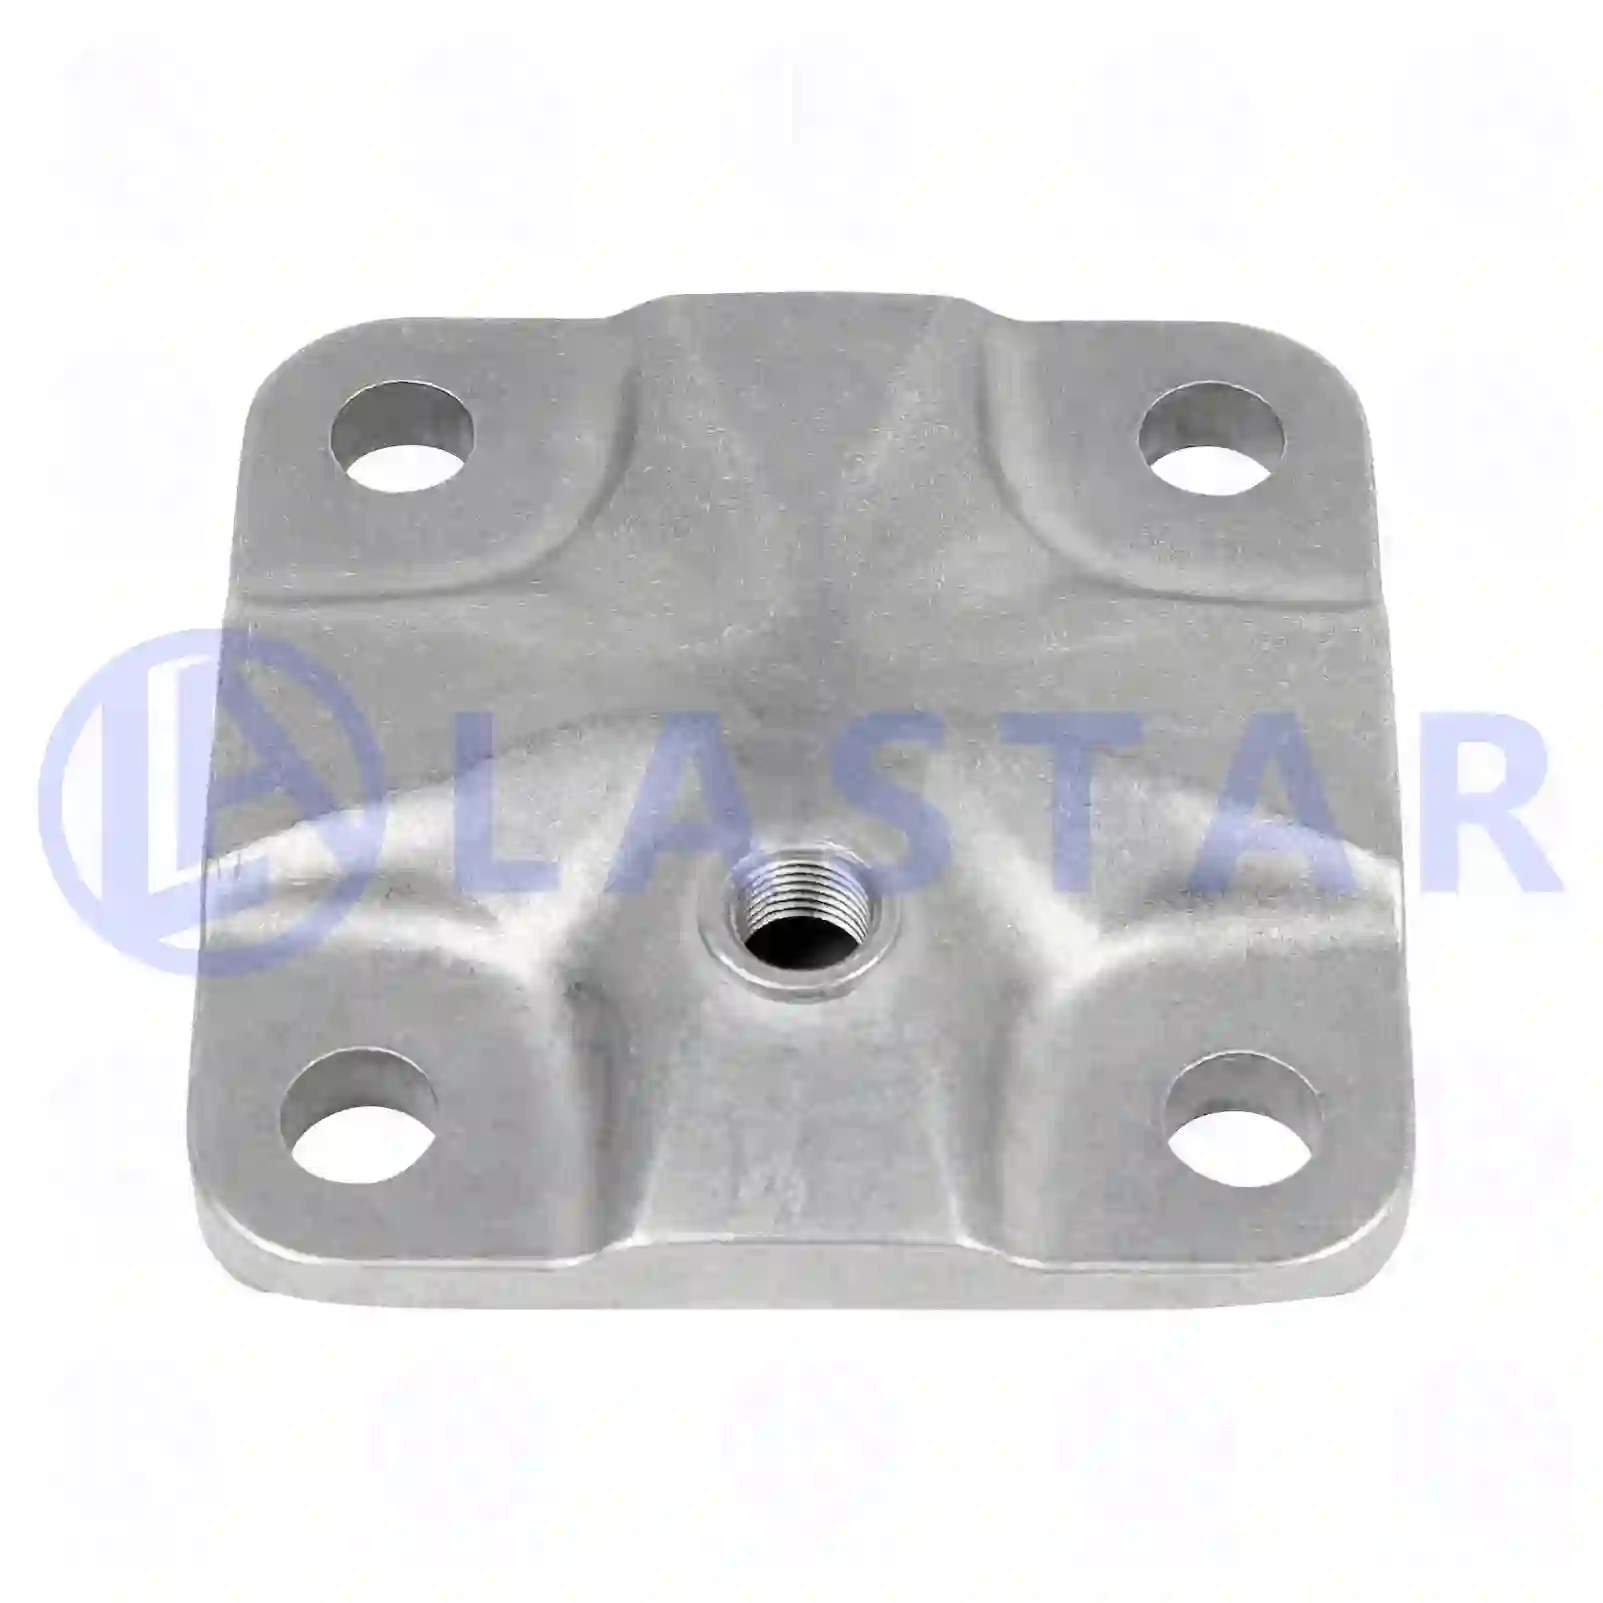 Cover, steering knuckle, 77731173, 1580271, ZG41249-0008 ||  77731173 Lastar Spare Part | Truck Spare Parts, Auotomotive Spare Parts Cover, steering knuckle, 77731173, 1580271, ZG41249-0008 ||  77731173 Lastar Spare Part | Truck Spare Parts, Auotomotive Spare Parts